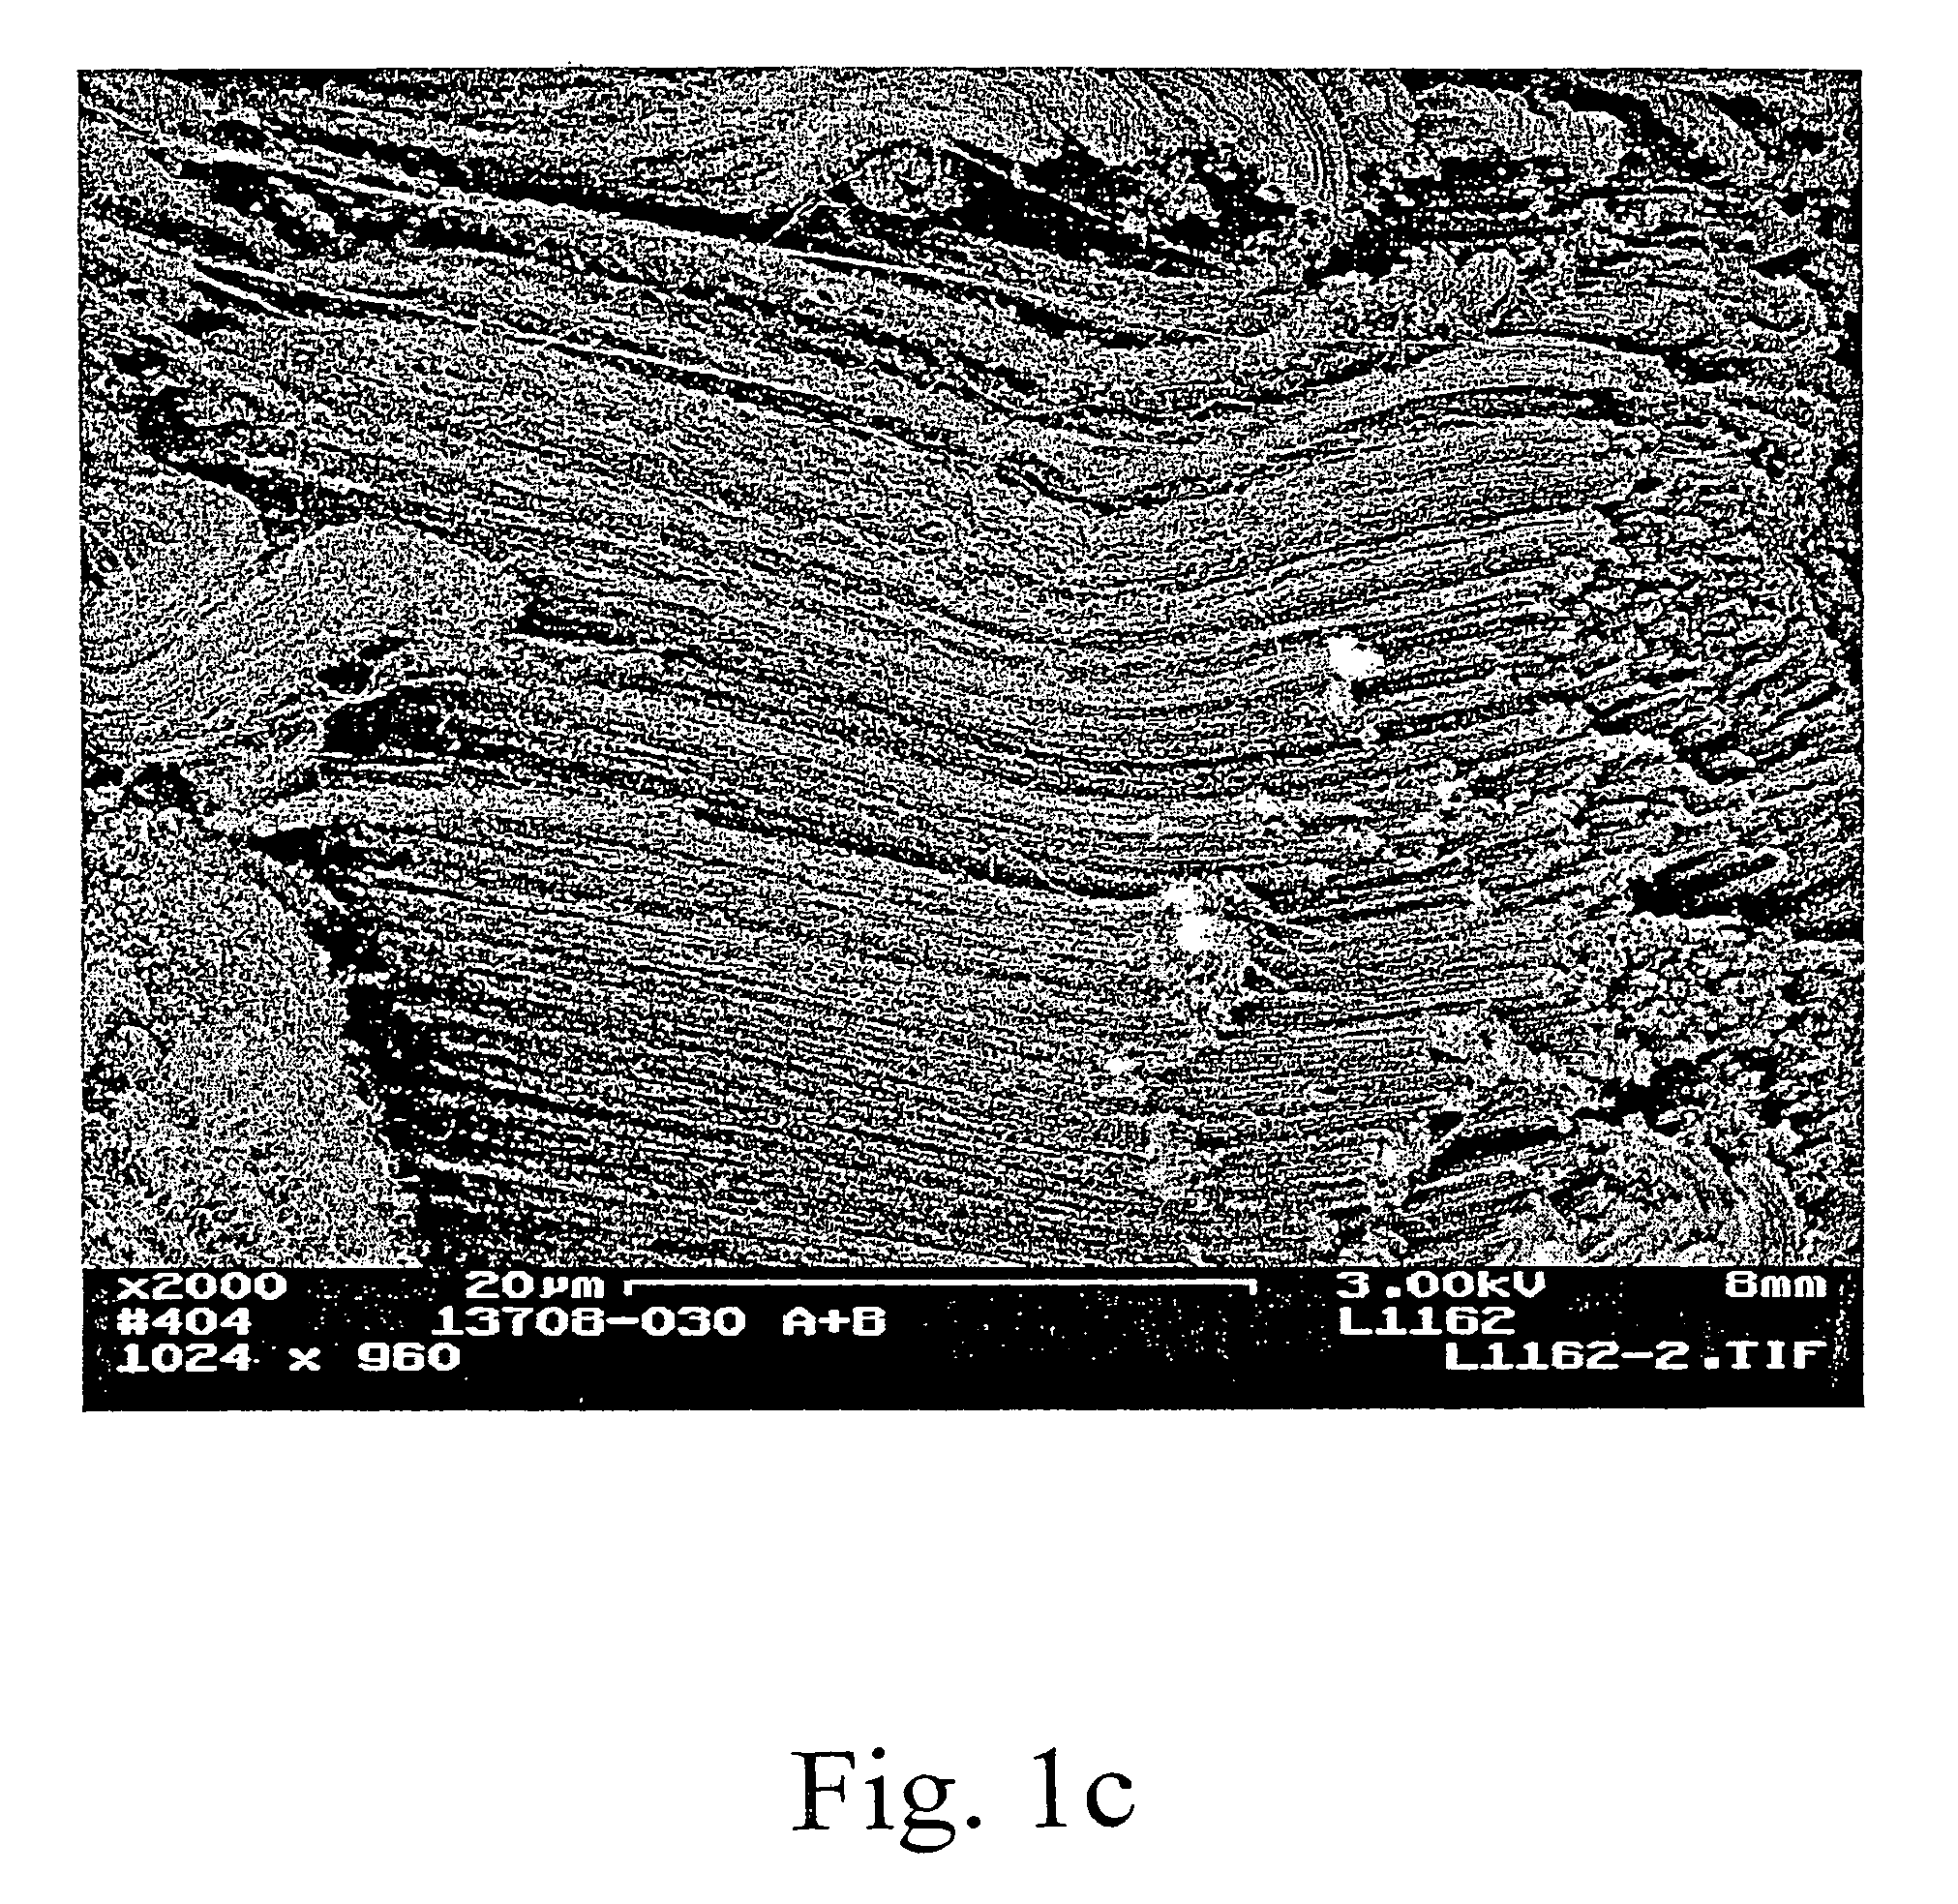 Carbon nanotube-containing catalysts, methods of making, and reactions catalyzed over nanotube catalysts